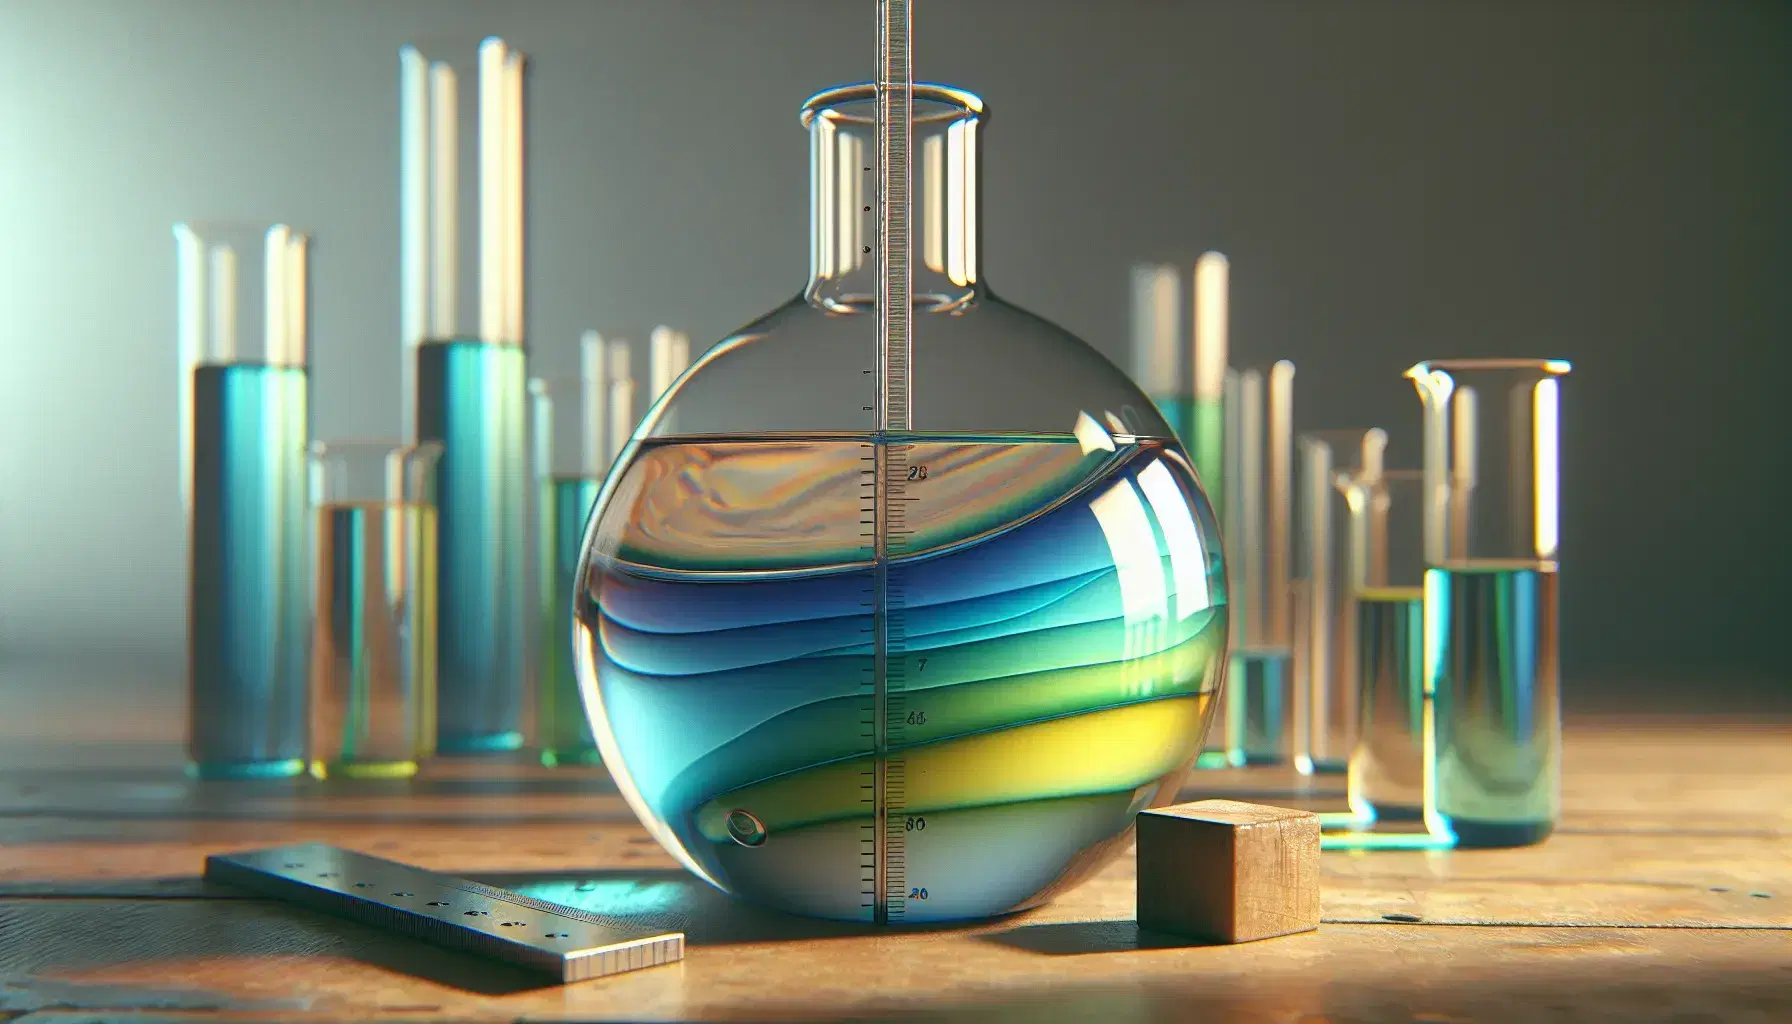 Close-up view of a layered colorful liquid in a glass flask on a wooden table, with a shiny steel ruler and out-of-focus beakers in the background.